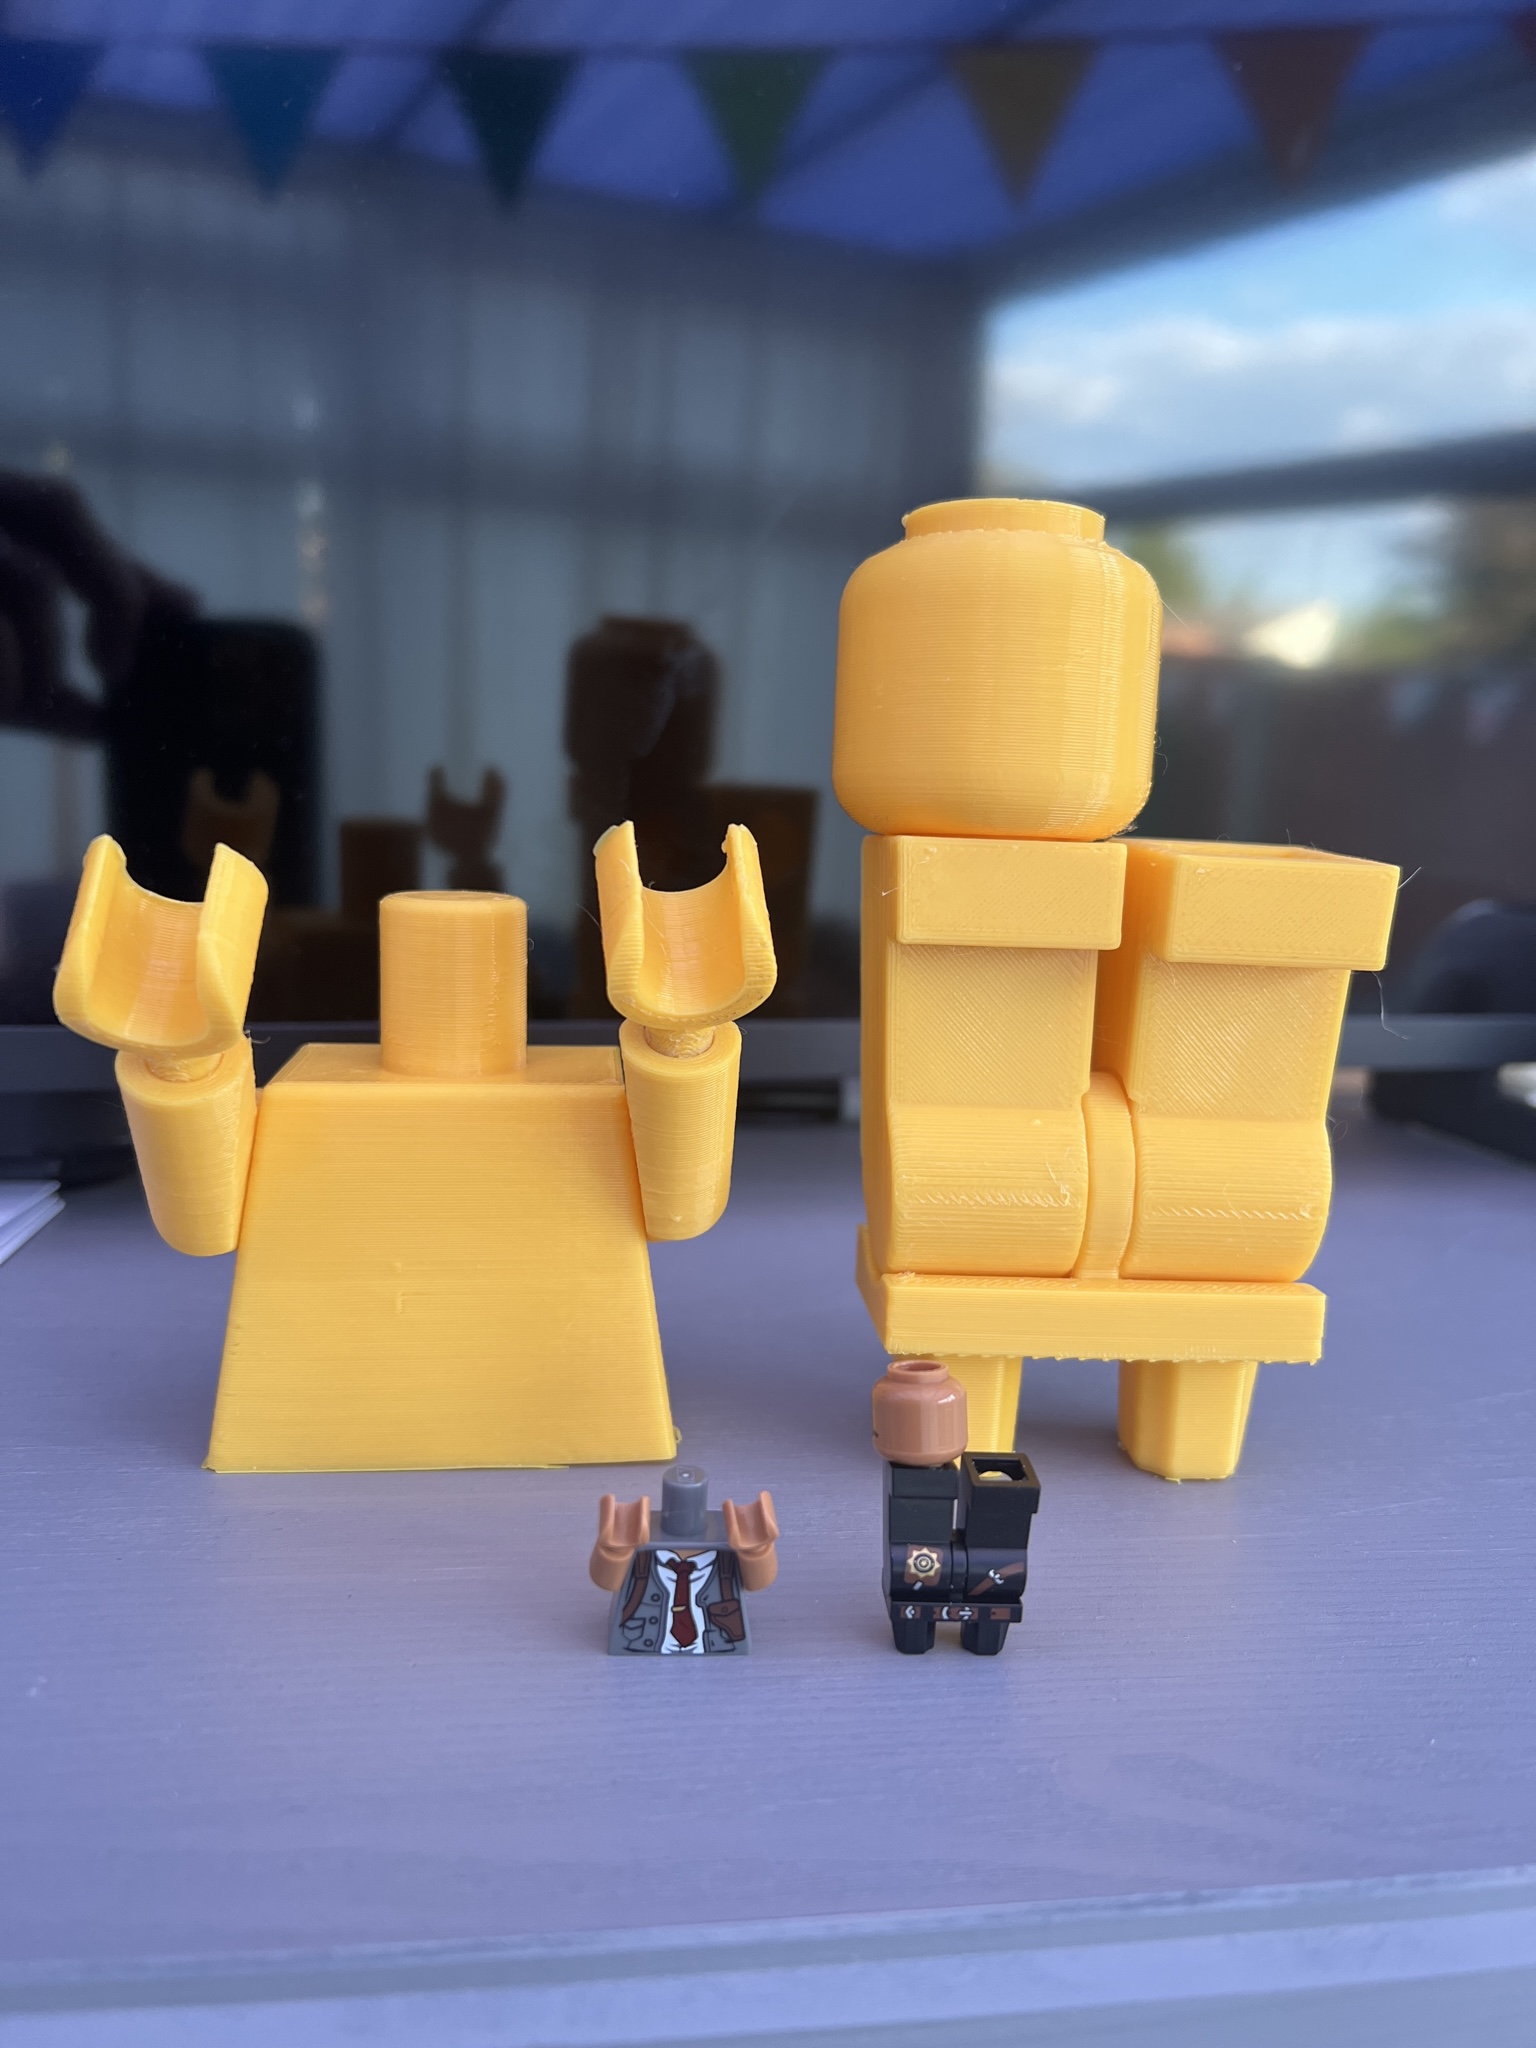 Lego Compatible Figure with Accurate Shapes and Dimensions